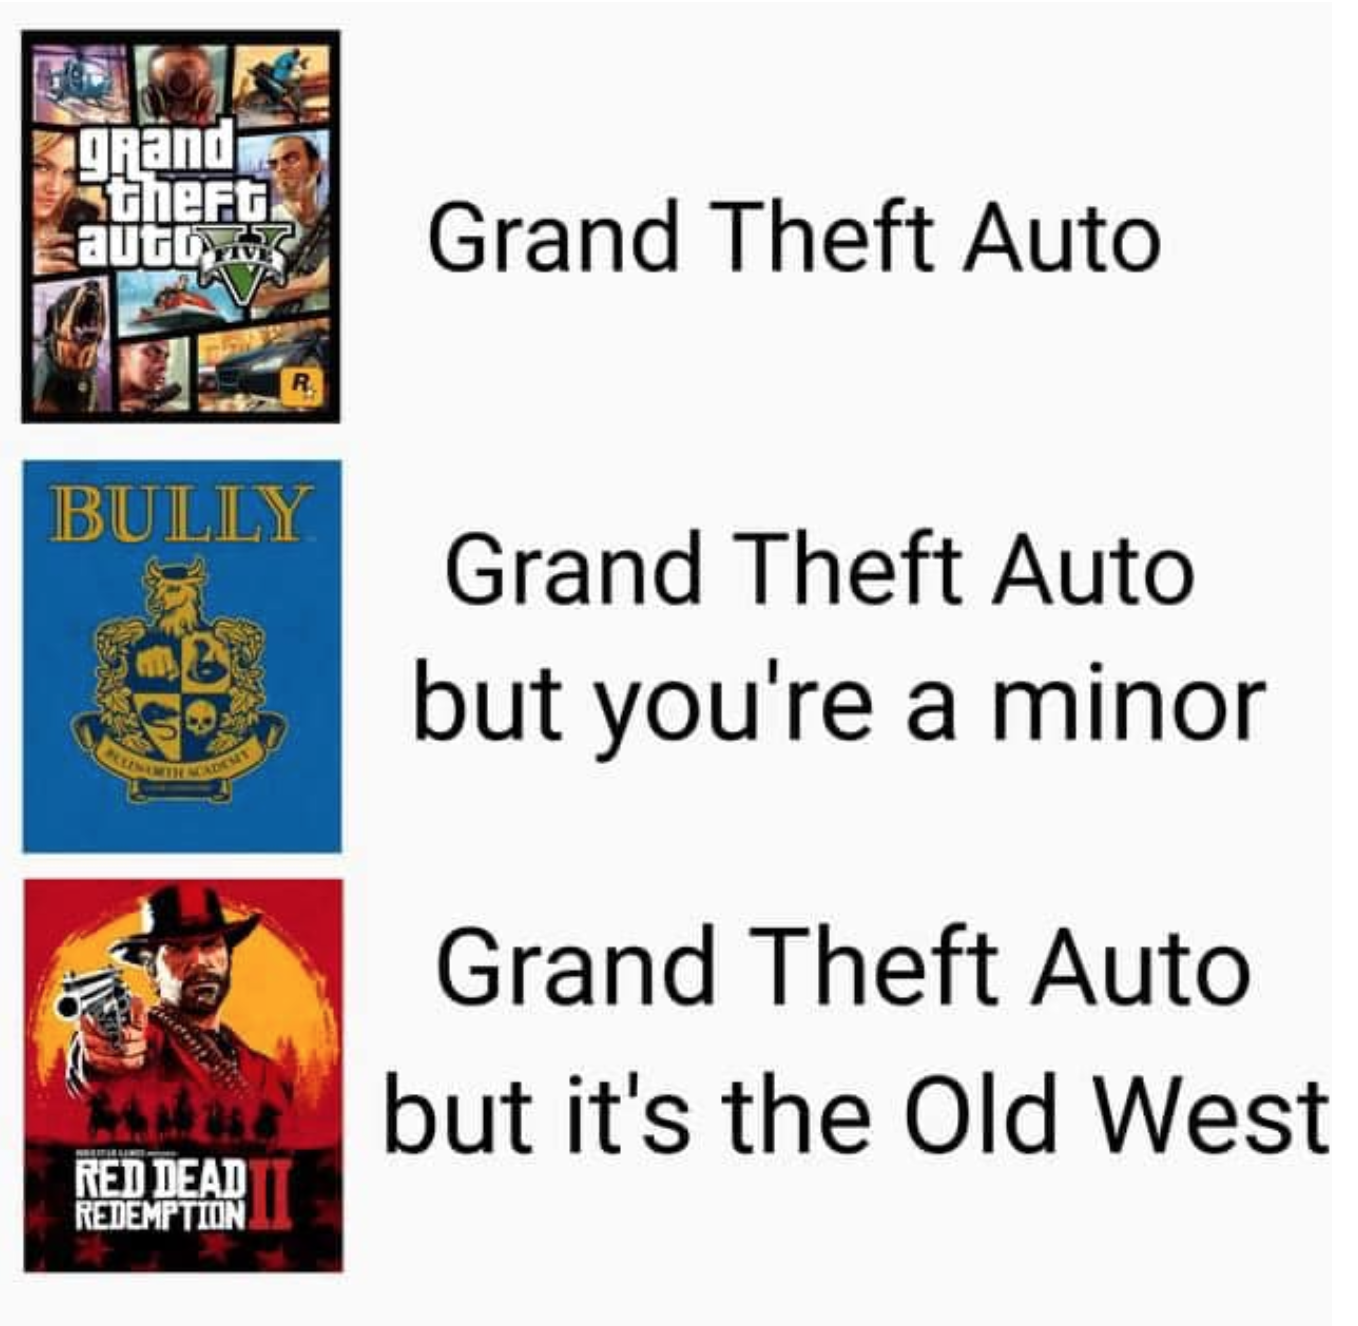 funny gaming memes - bully game - grand Stheft auto, , Grand Theft Auto Bully Grand Theft Auto but you're a minor Grand Theft Auto but it's the Old West Red Dead Redemption